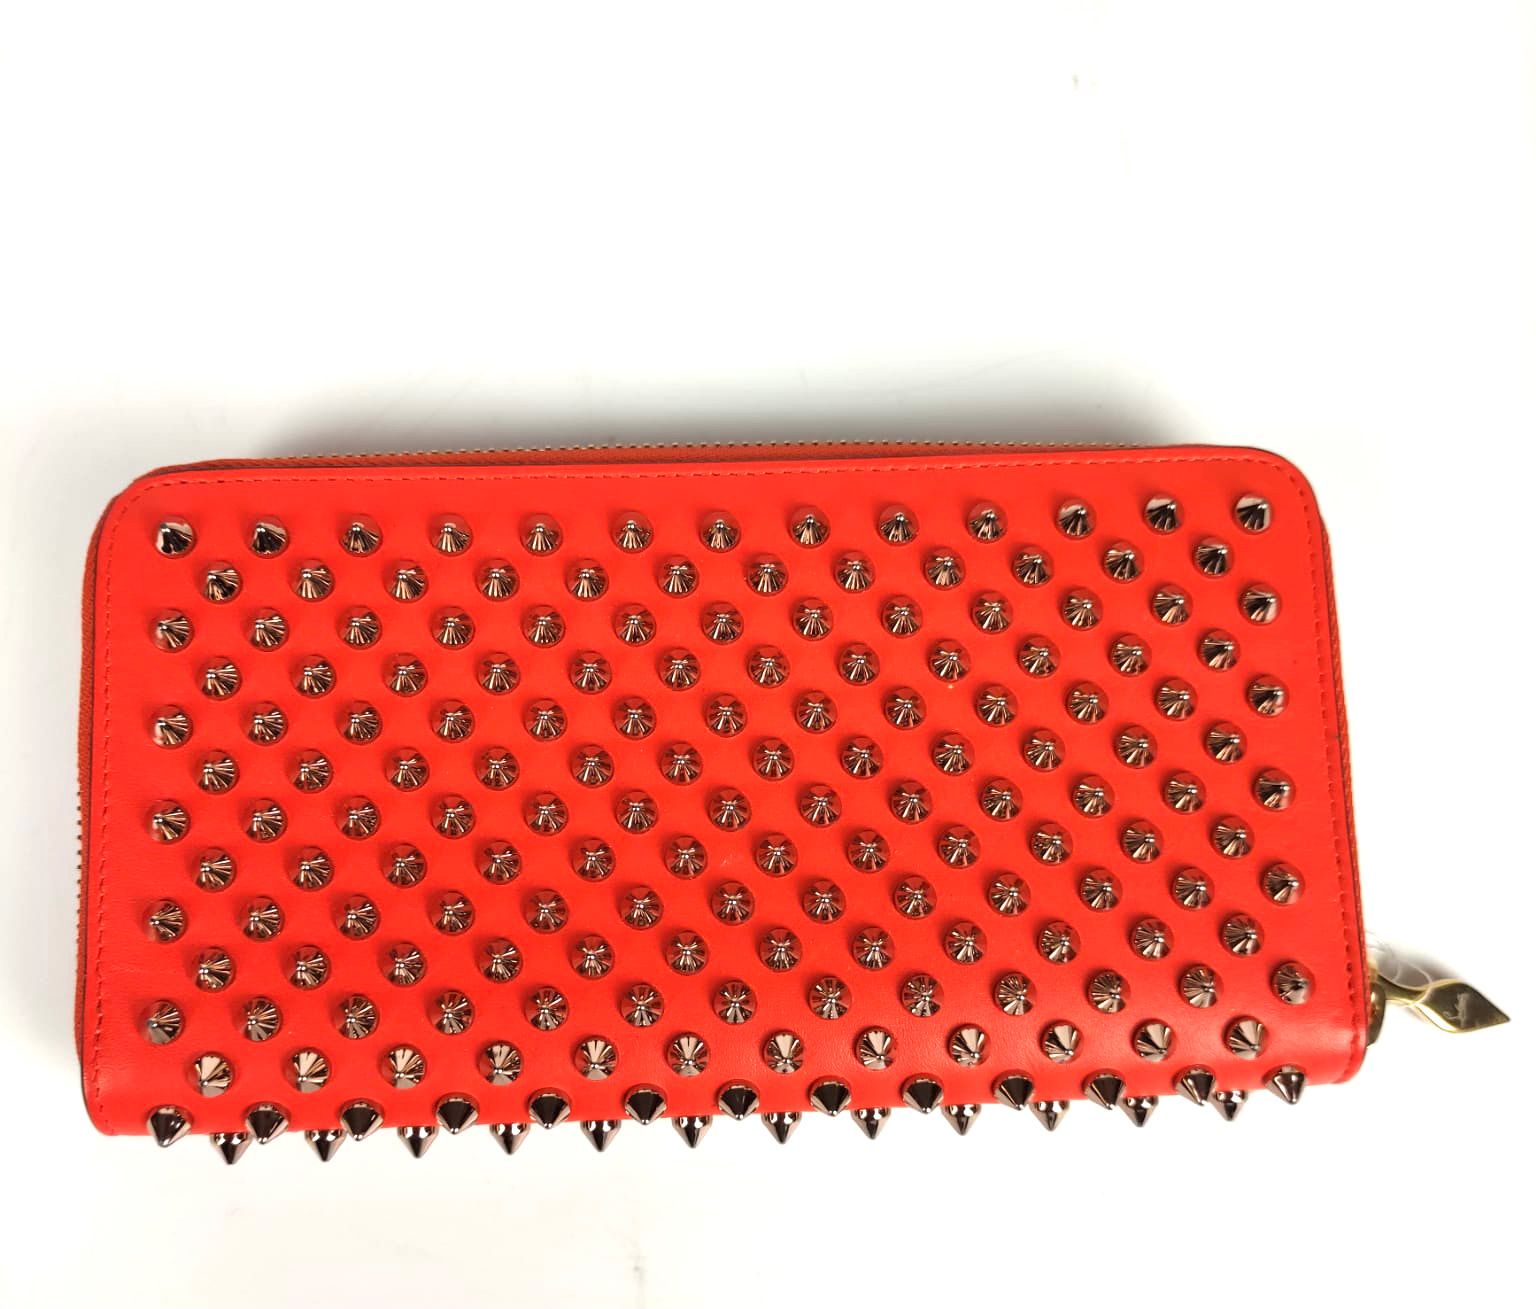 Null LOUBOUTIN Orange leather studded wallet. 11 x 20 cm (as new).